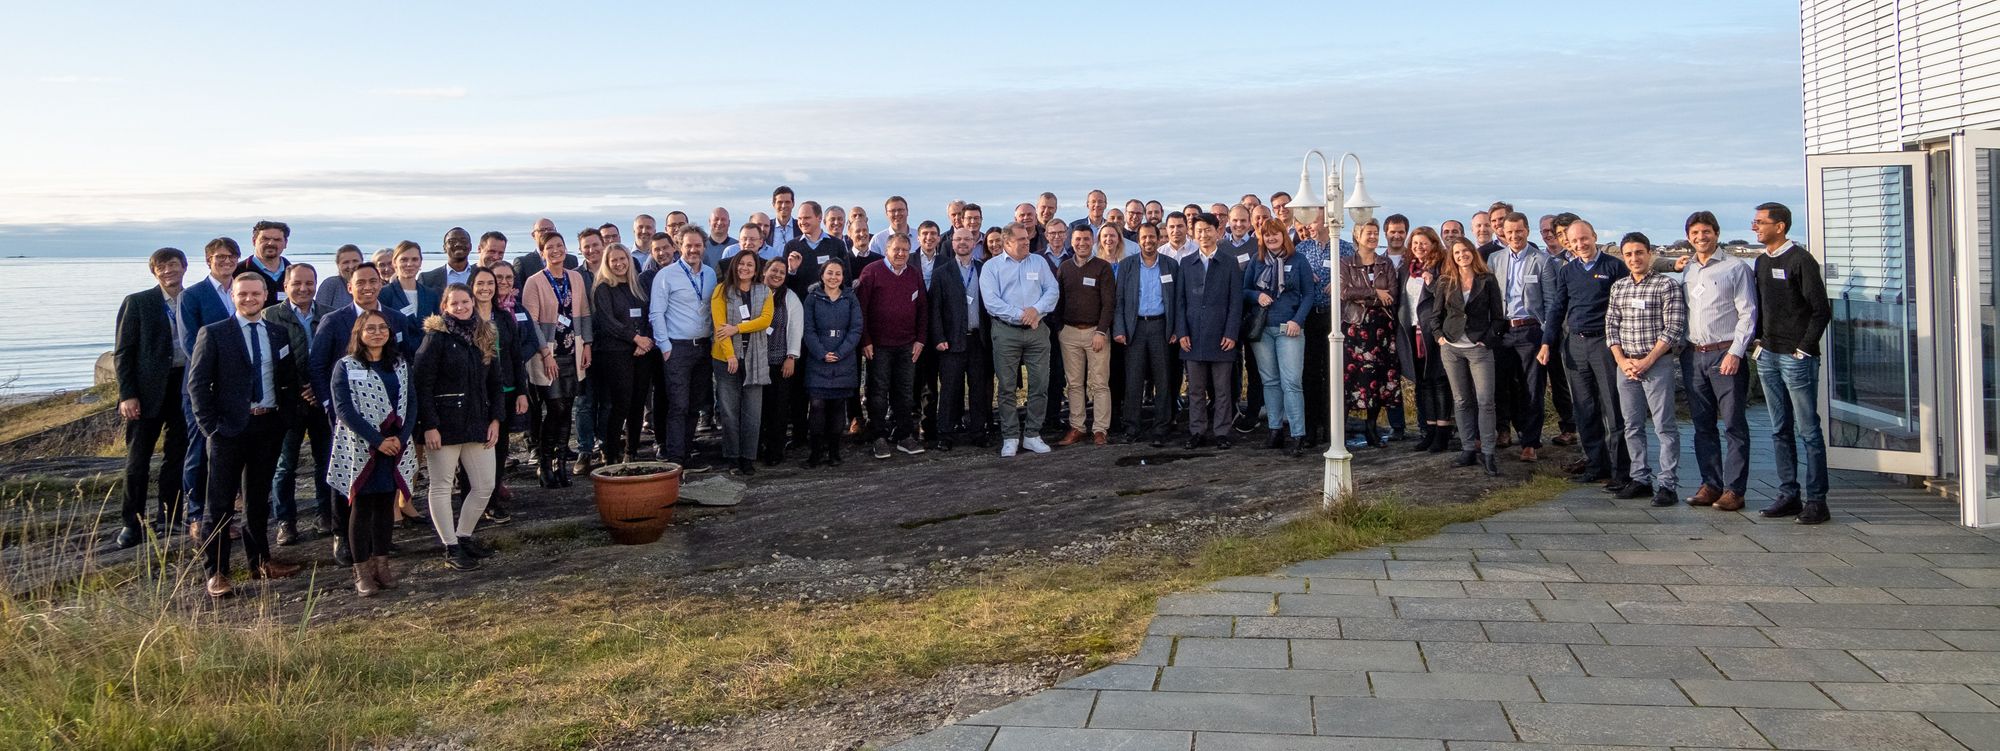 Participants of the 1st Geosteering Workshop by NORCE and NFES, Novmber 2019